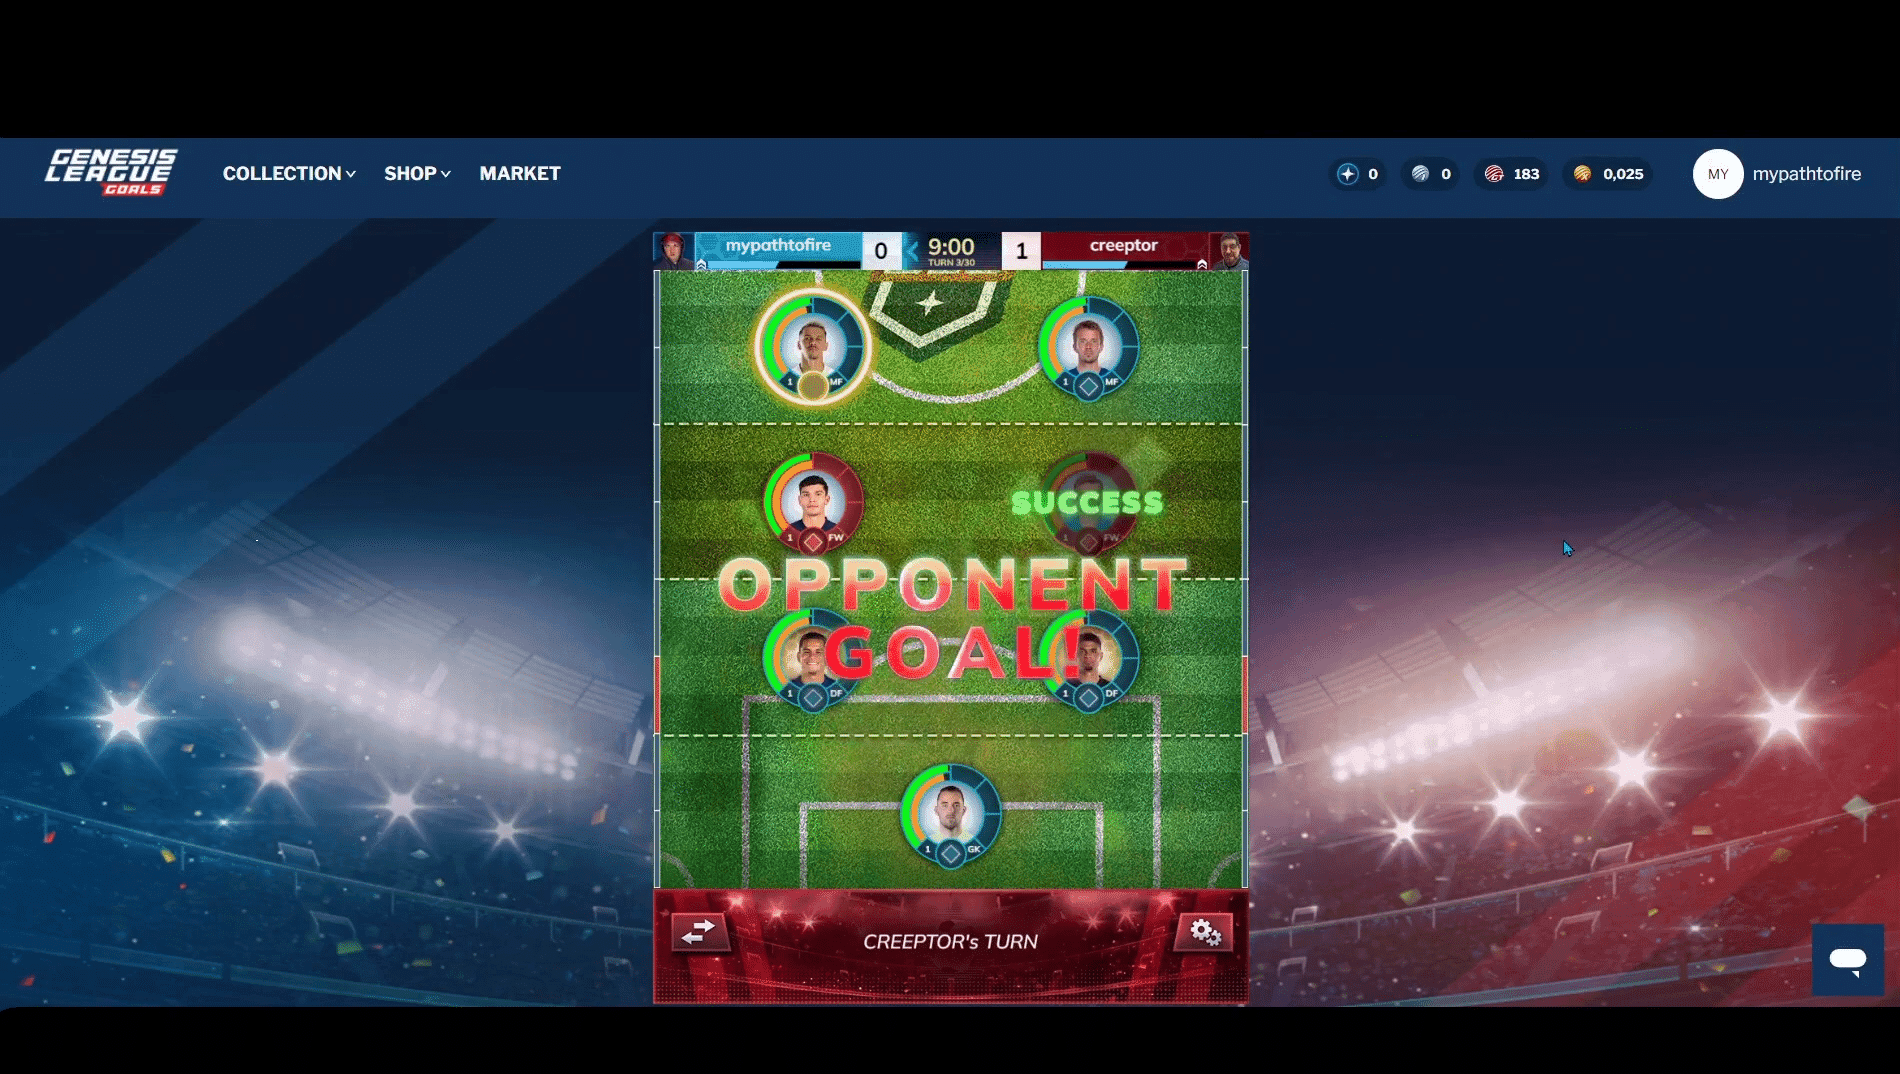 Genesis League Goals offers an official gateway to collect, compete, and earn through licensed digital trading cards featuring Major Soccer.